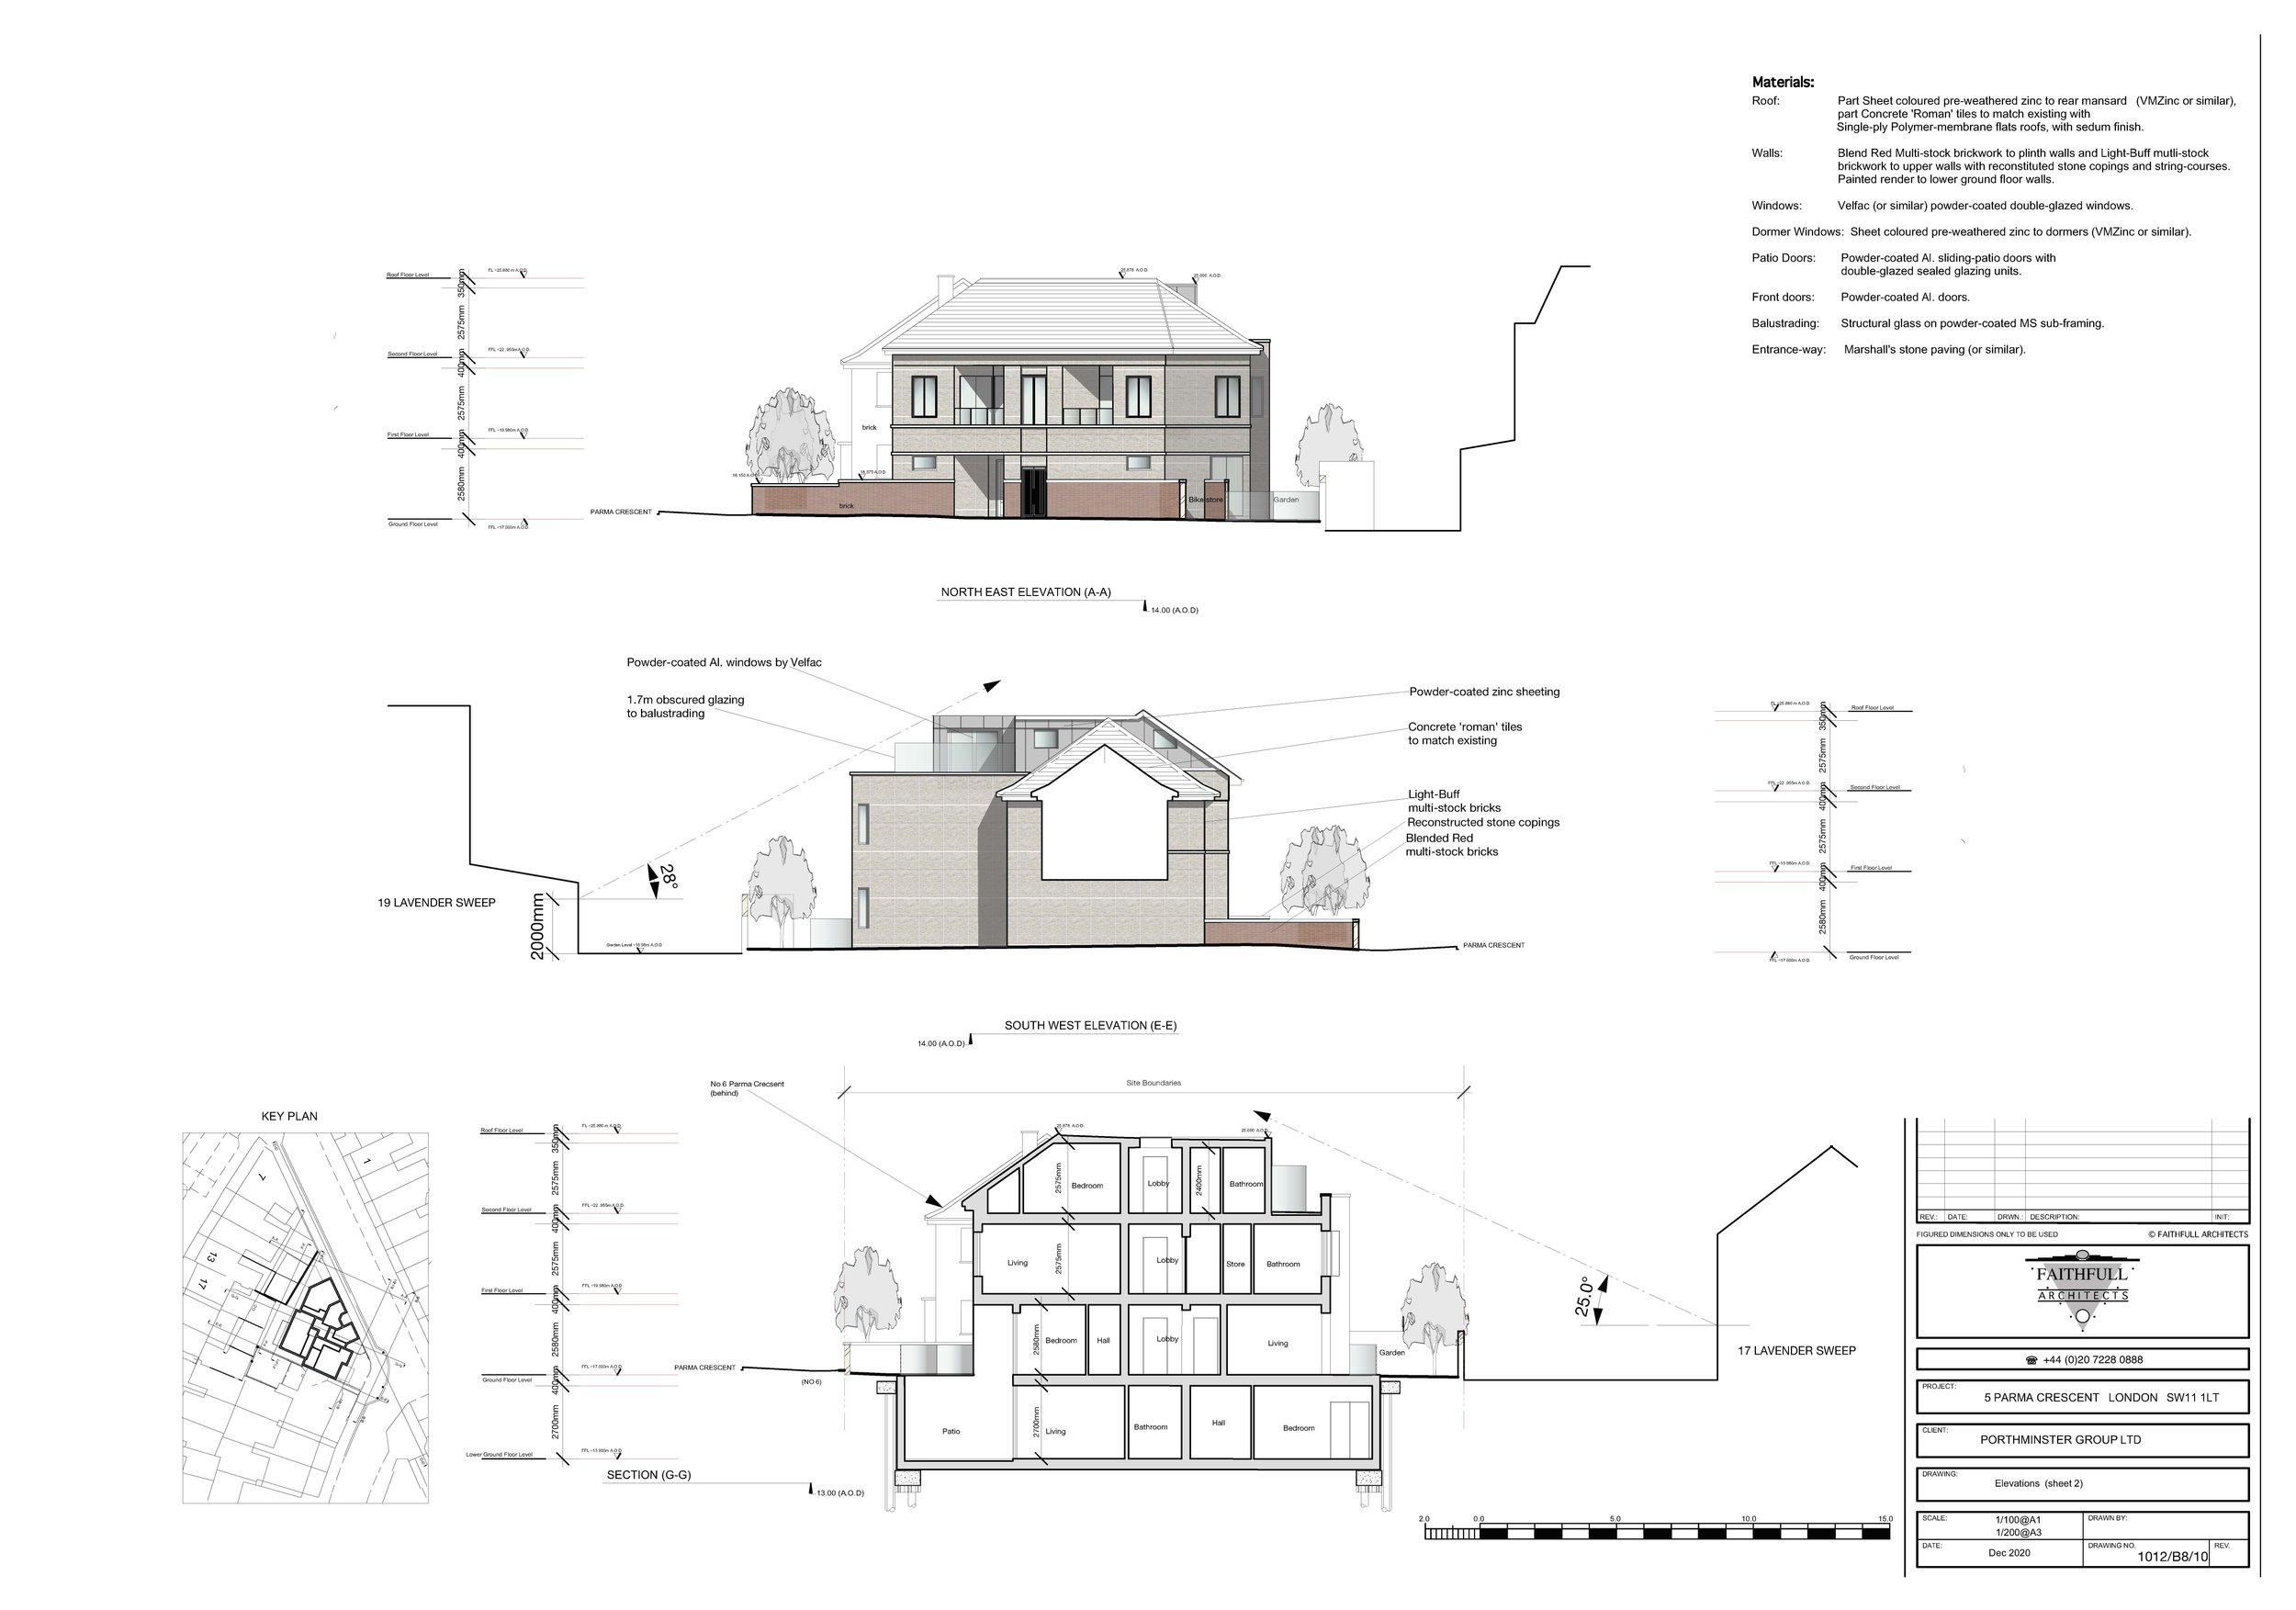 Proposed Plans Elevations Sections 7 flats_Page_7.jpg